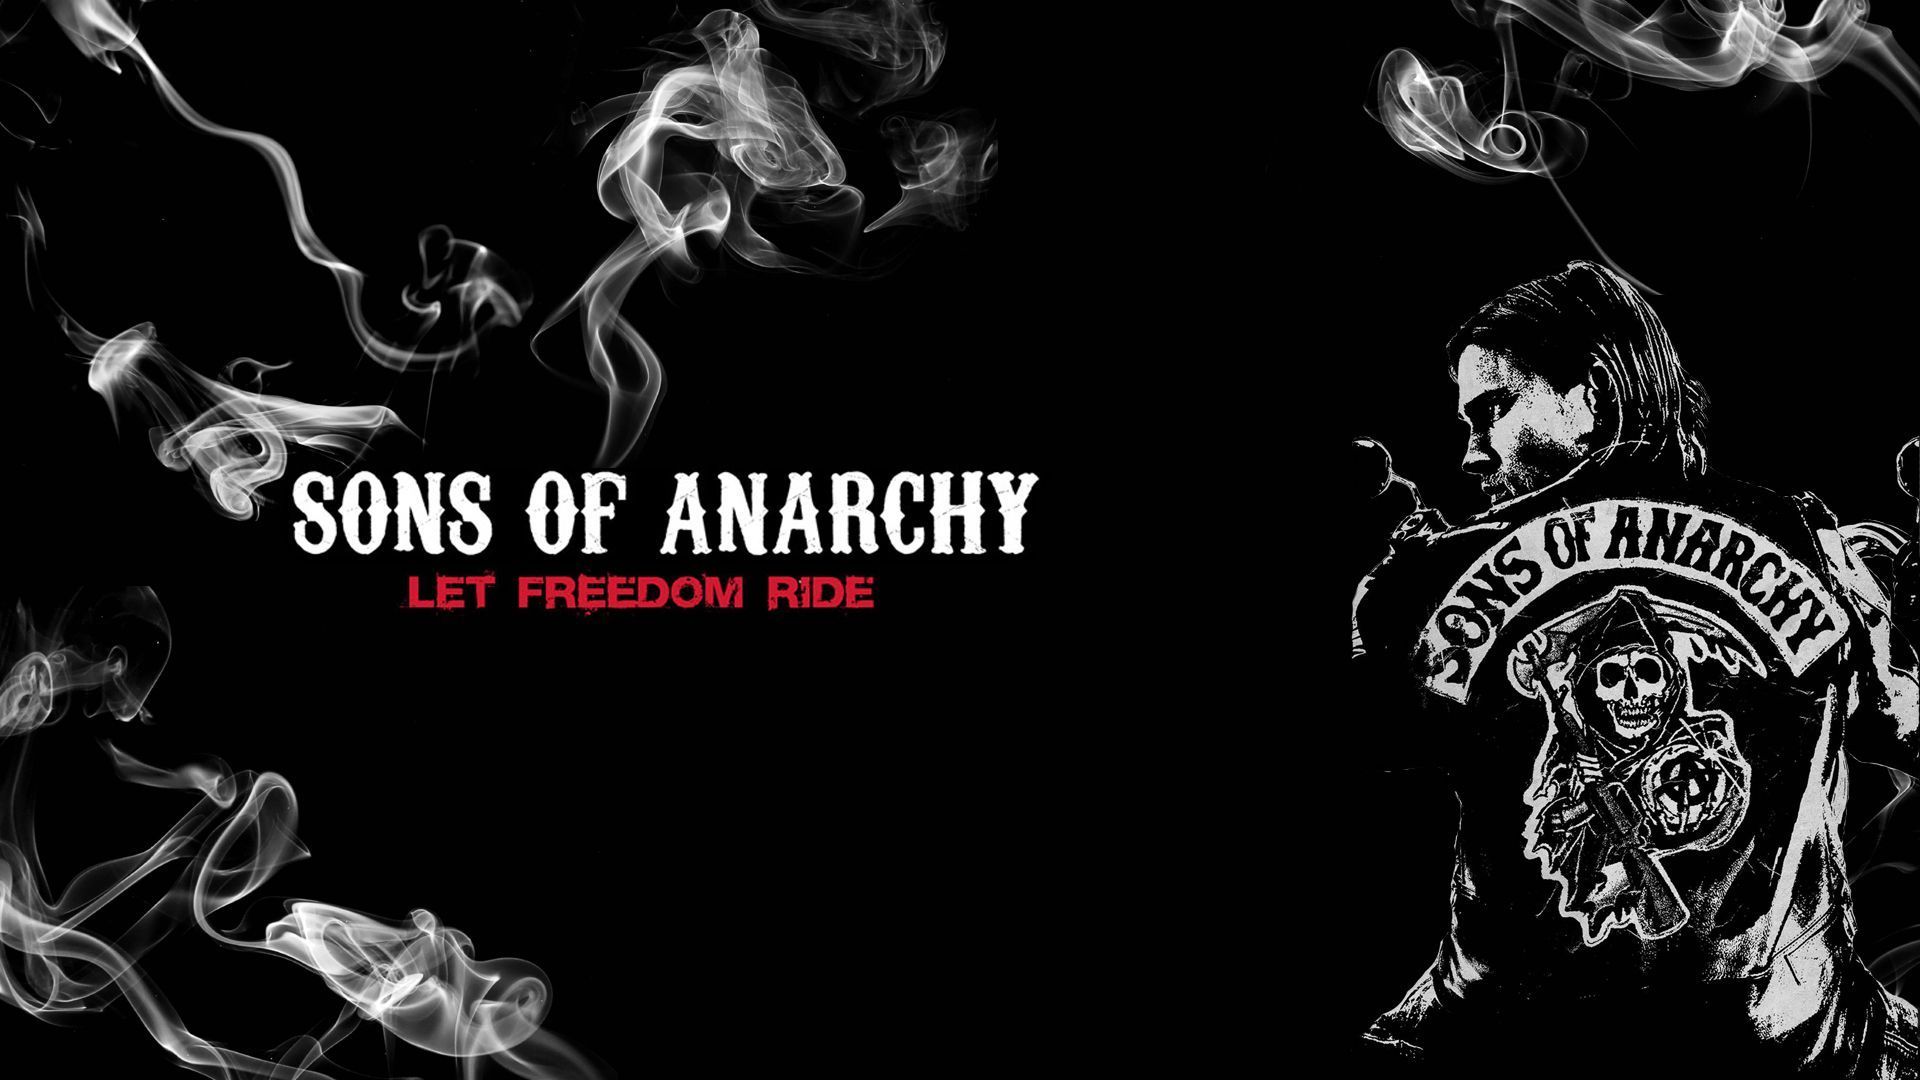 Sons Of Anarchy - Sons Of Anarchy Wallpaper 19815280 - Fanpop